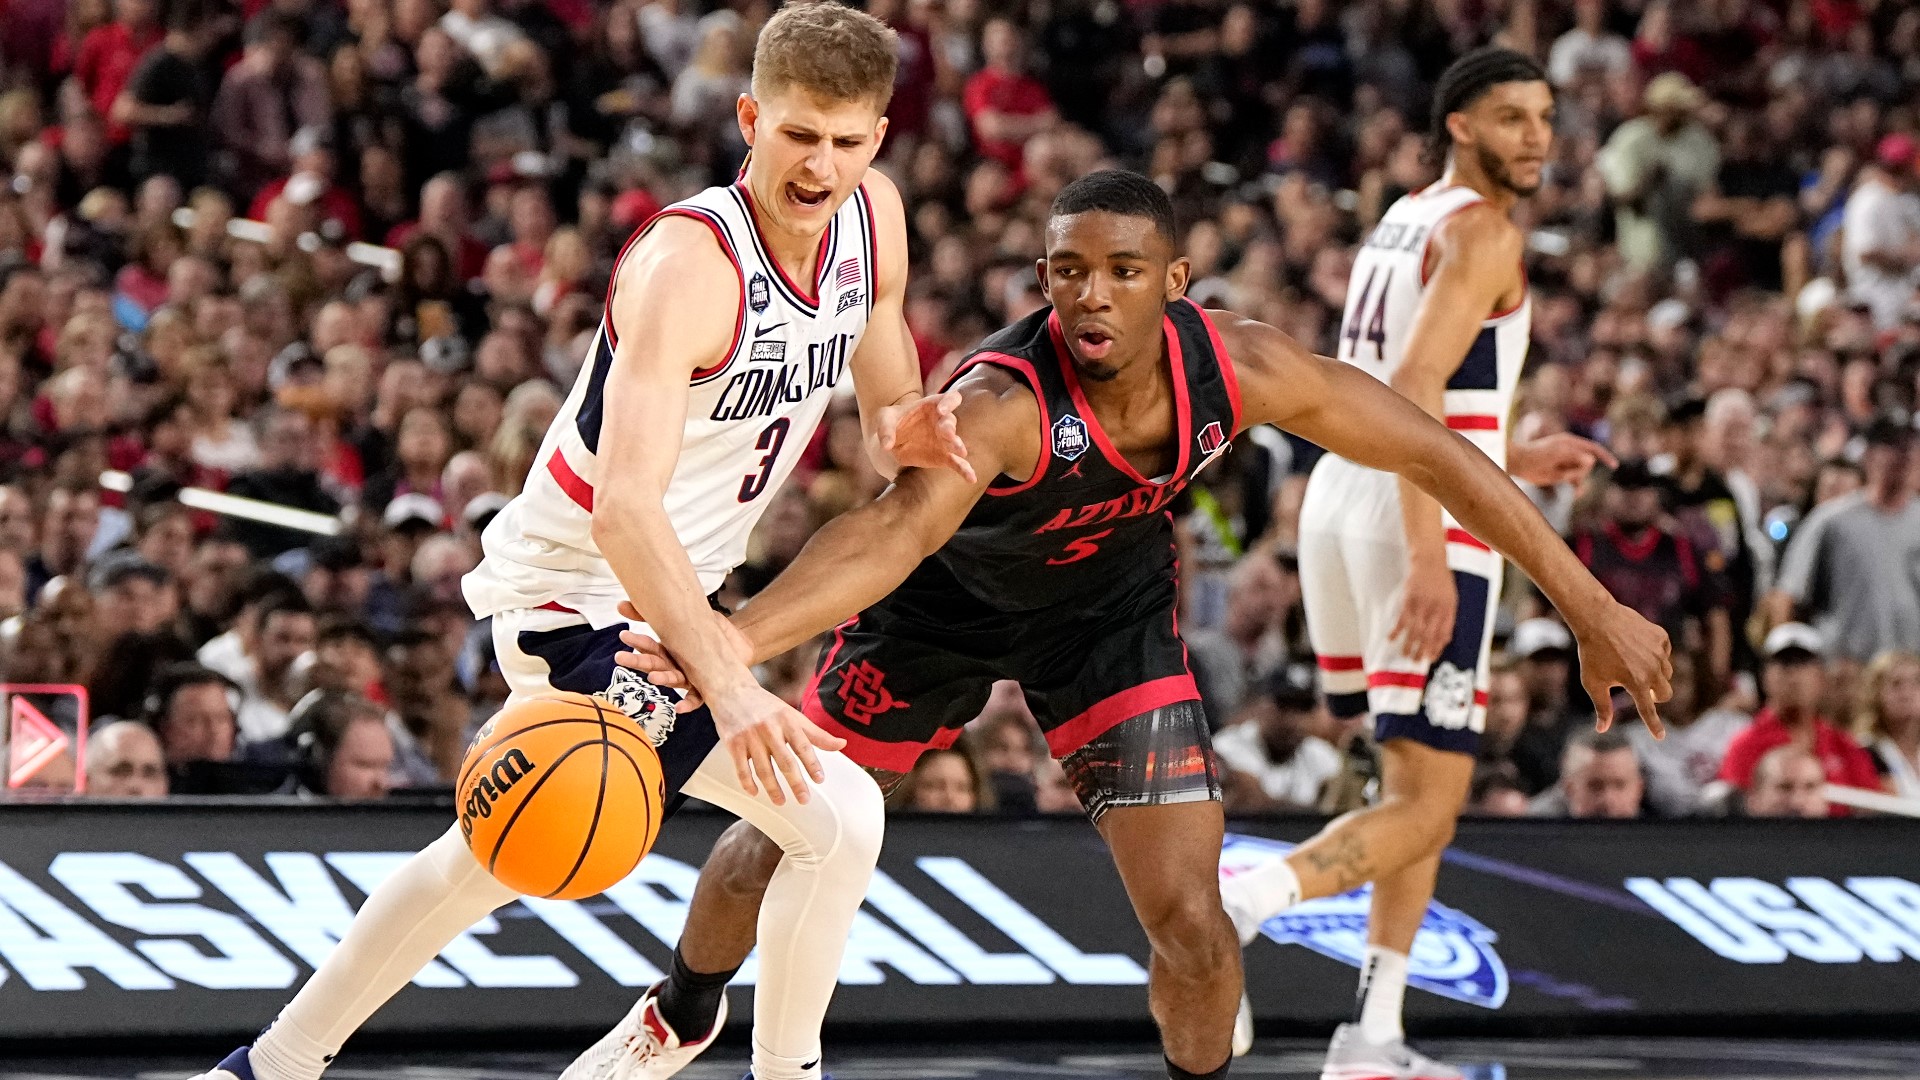 The San Diego State Men’s season came to an end after a loss to a strong UConn team in NCAA title game, UConn wins their fifth NCAA title